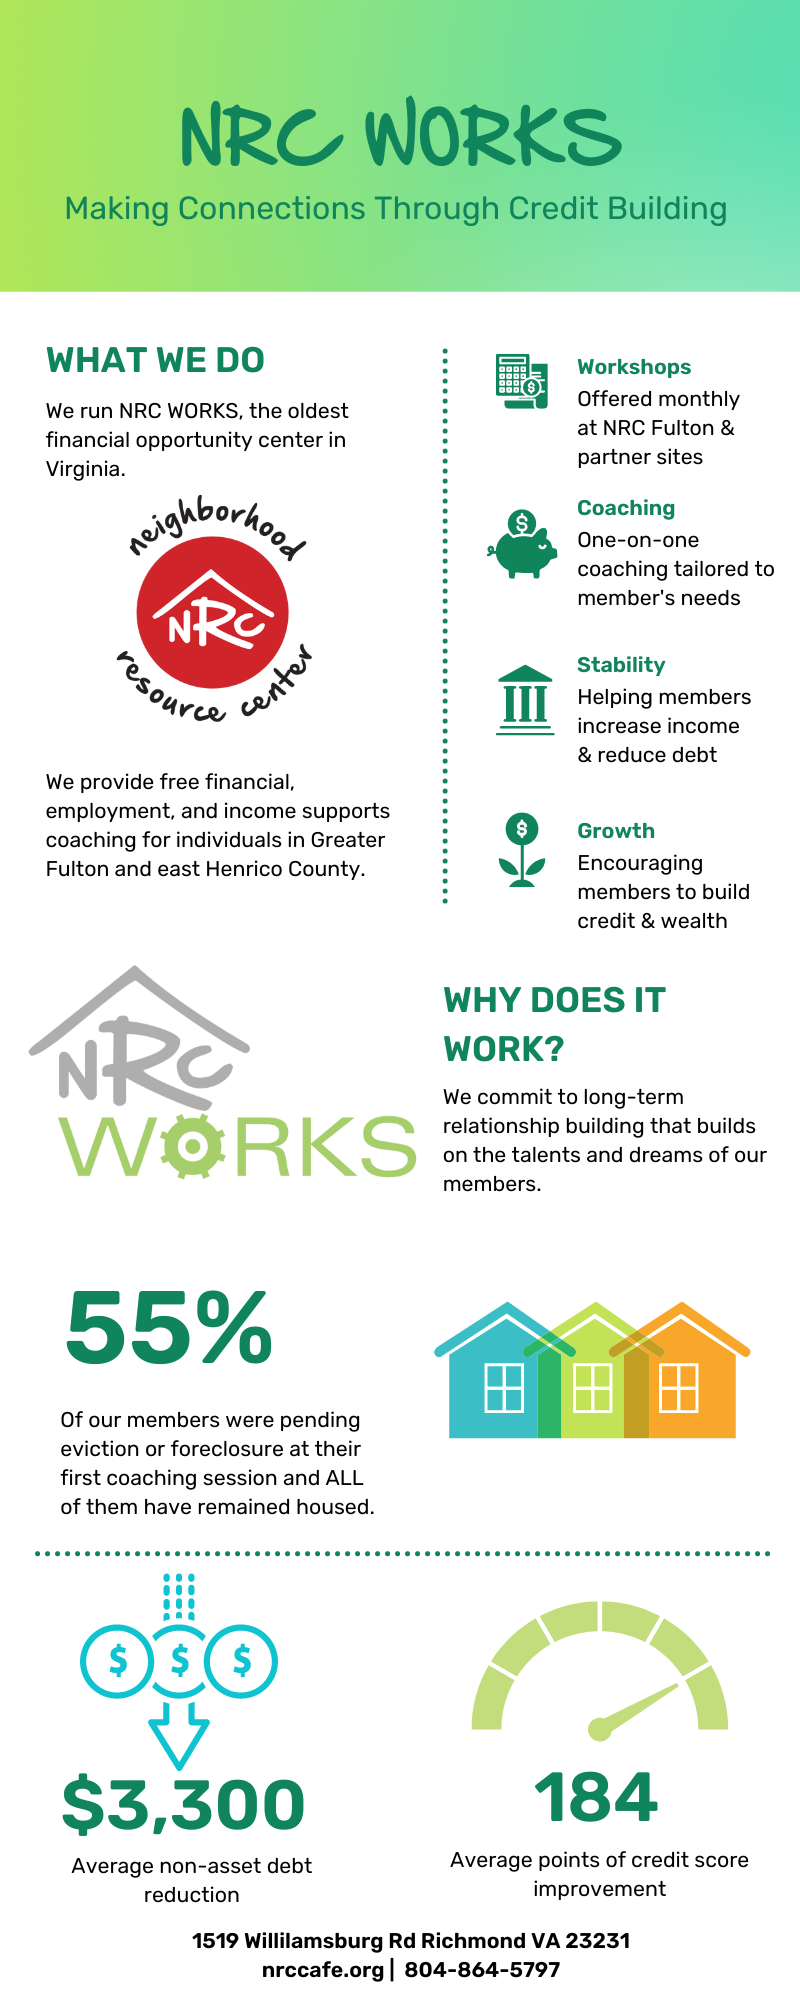 An infographic of data from the NRC WORKS program. The data contained within is outlined in our corresponding post.